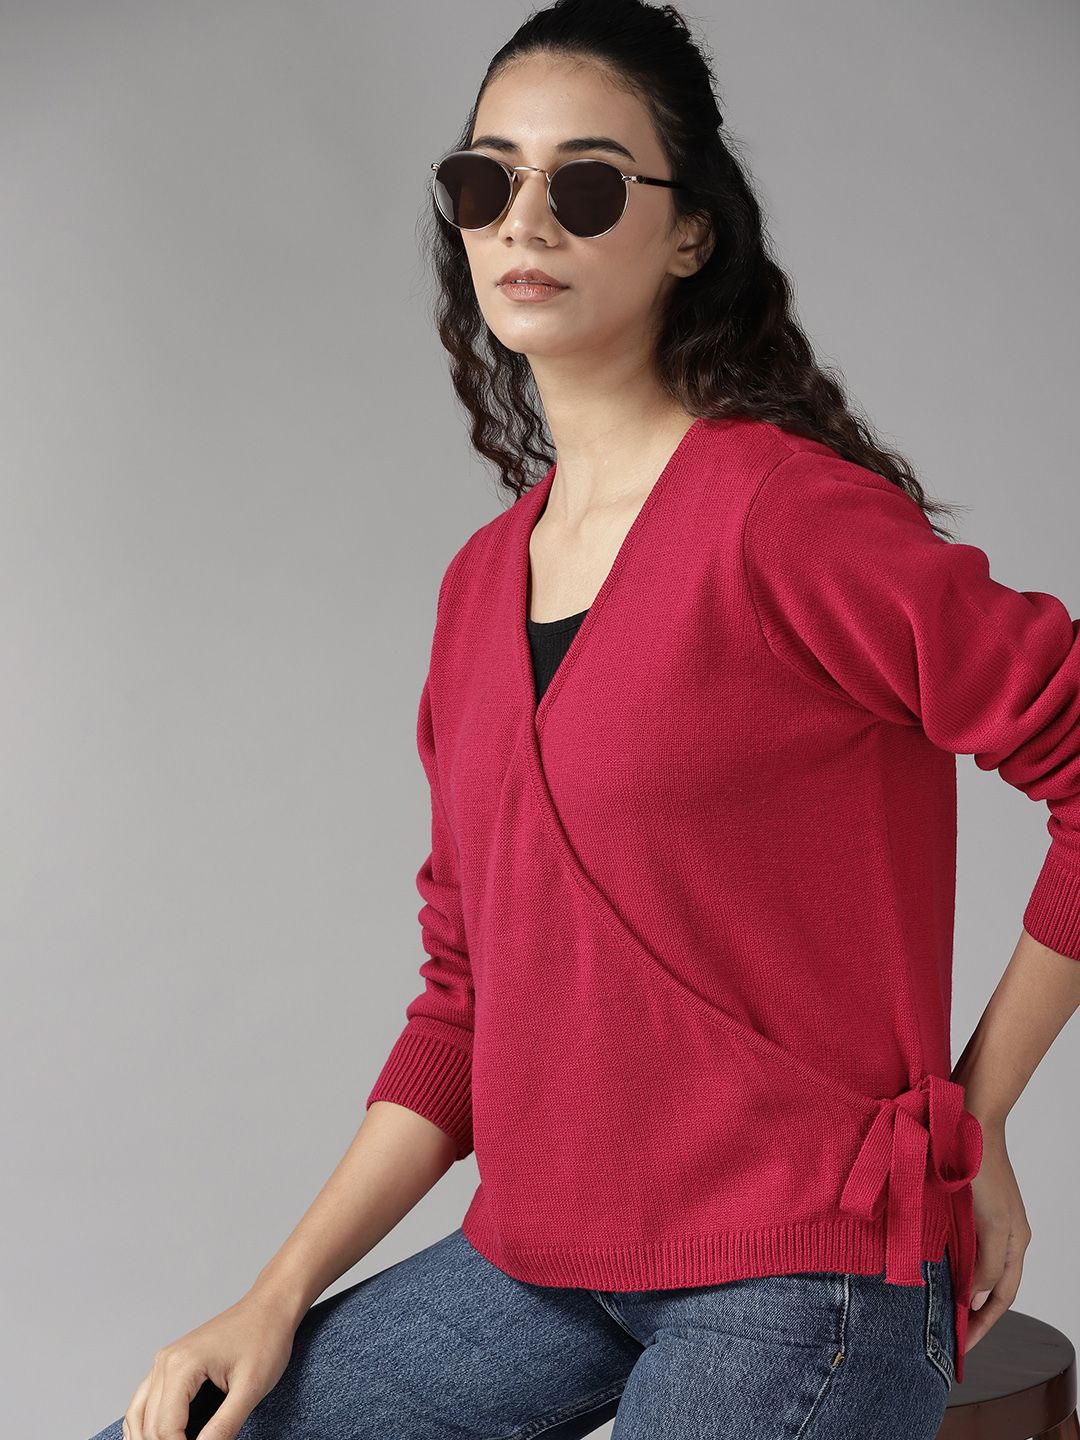 Roadster Women Magenta Solid Wrap Sweater Price in India